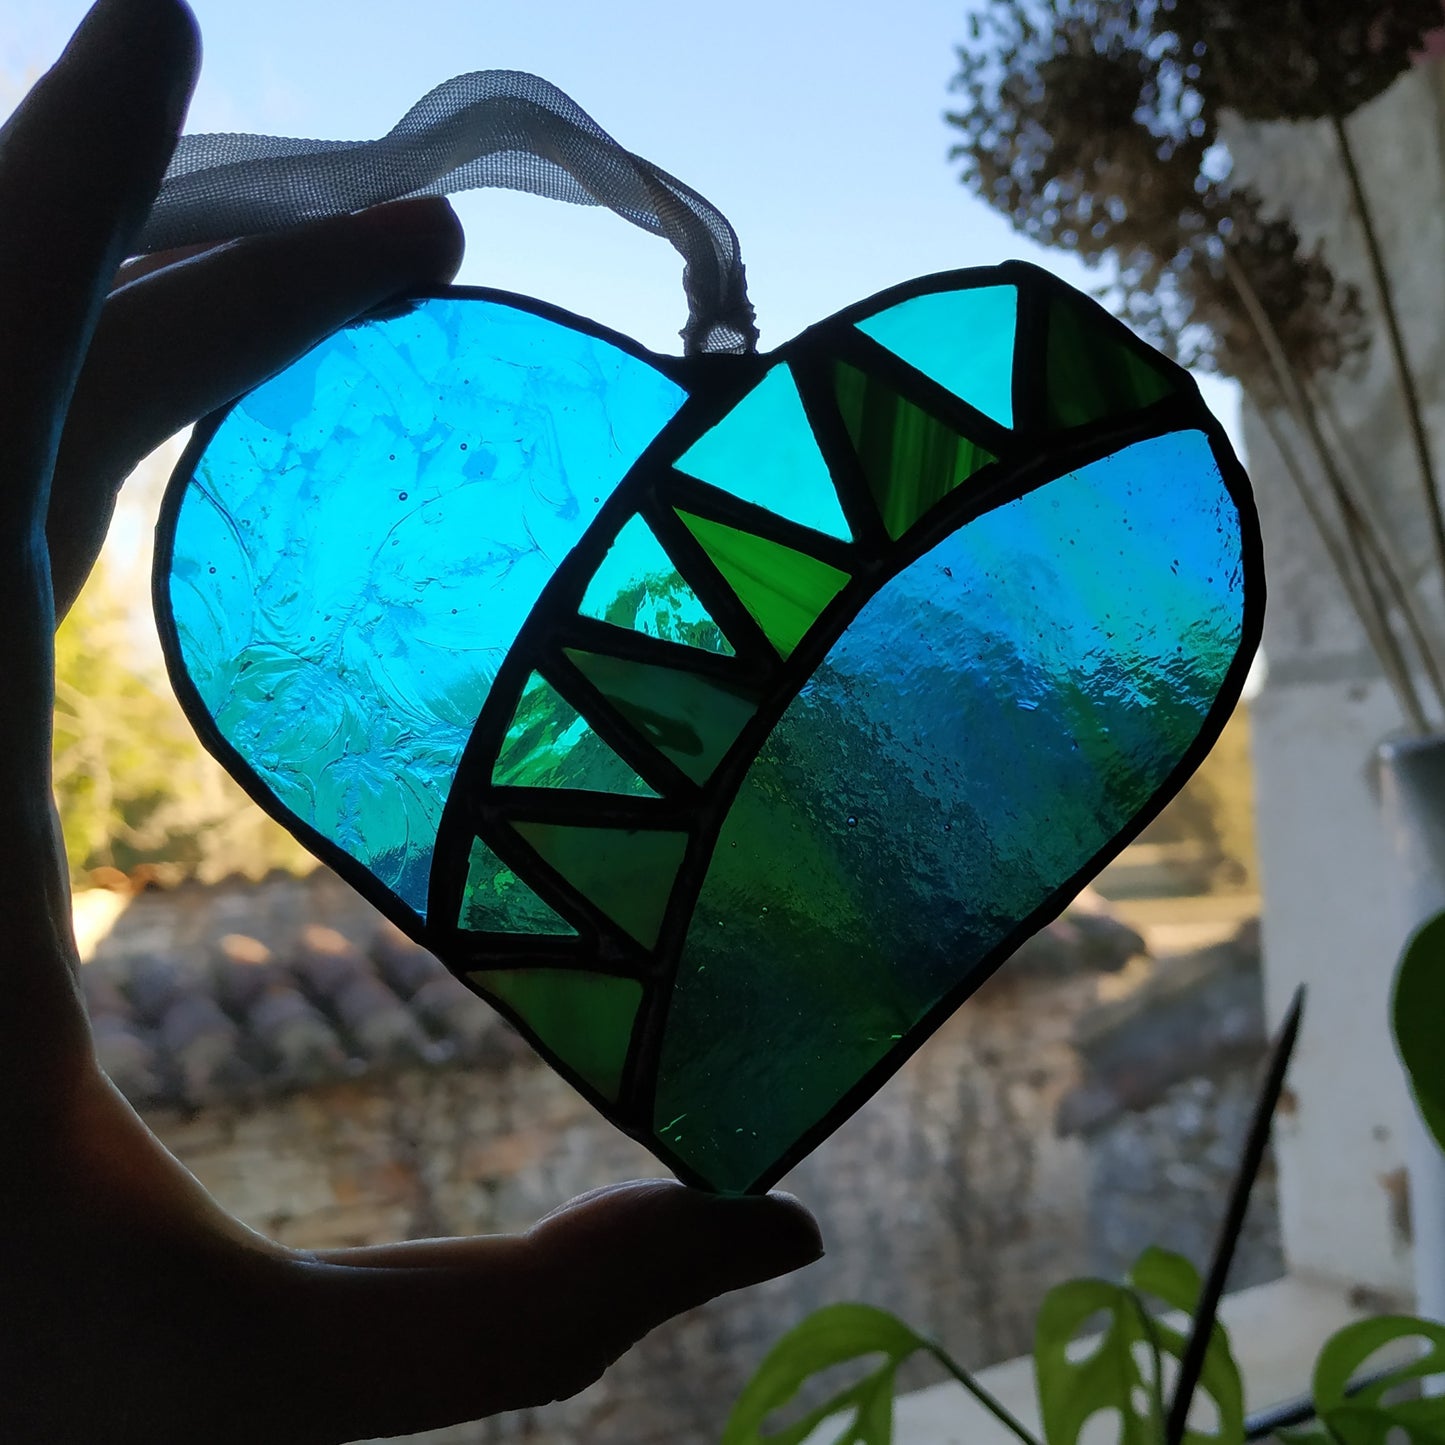 Silhouette of hand holding a satined glass heart made by Pamela Angus up to a window 